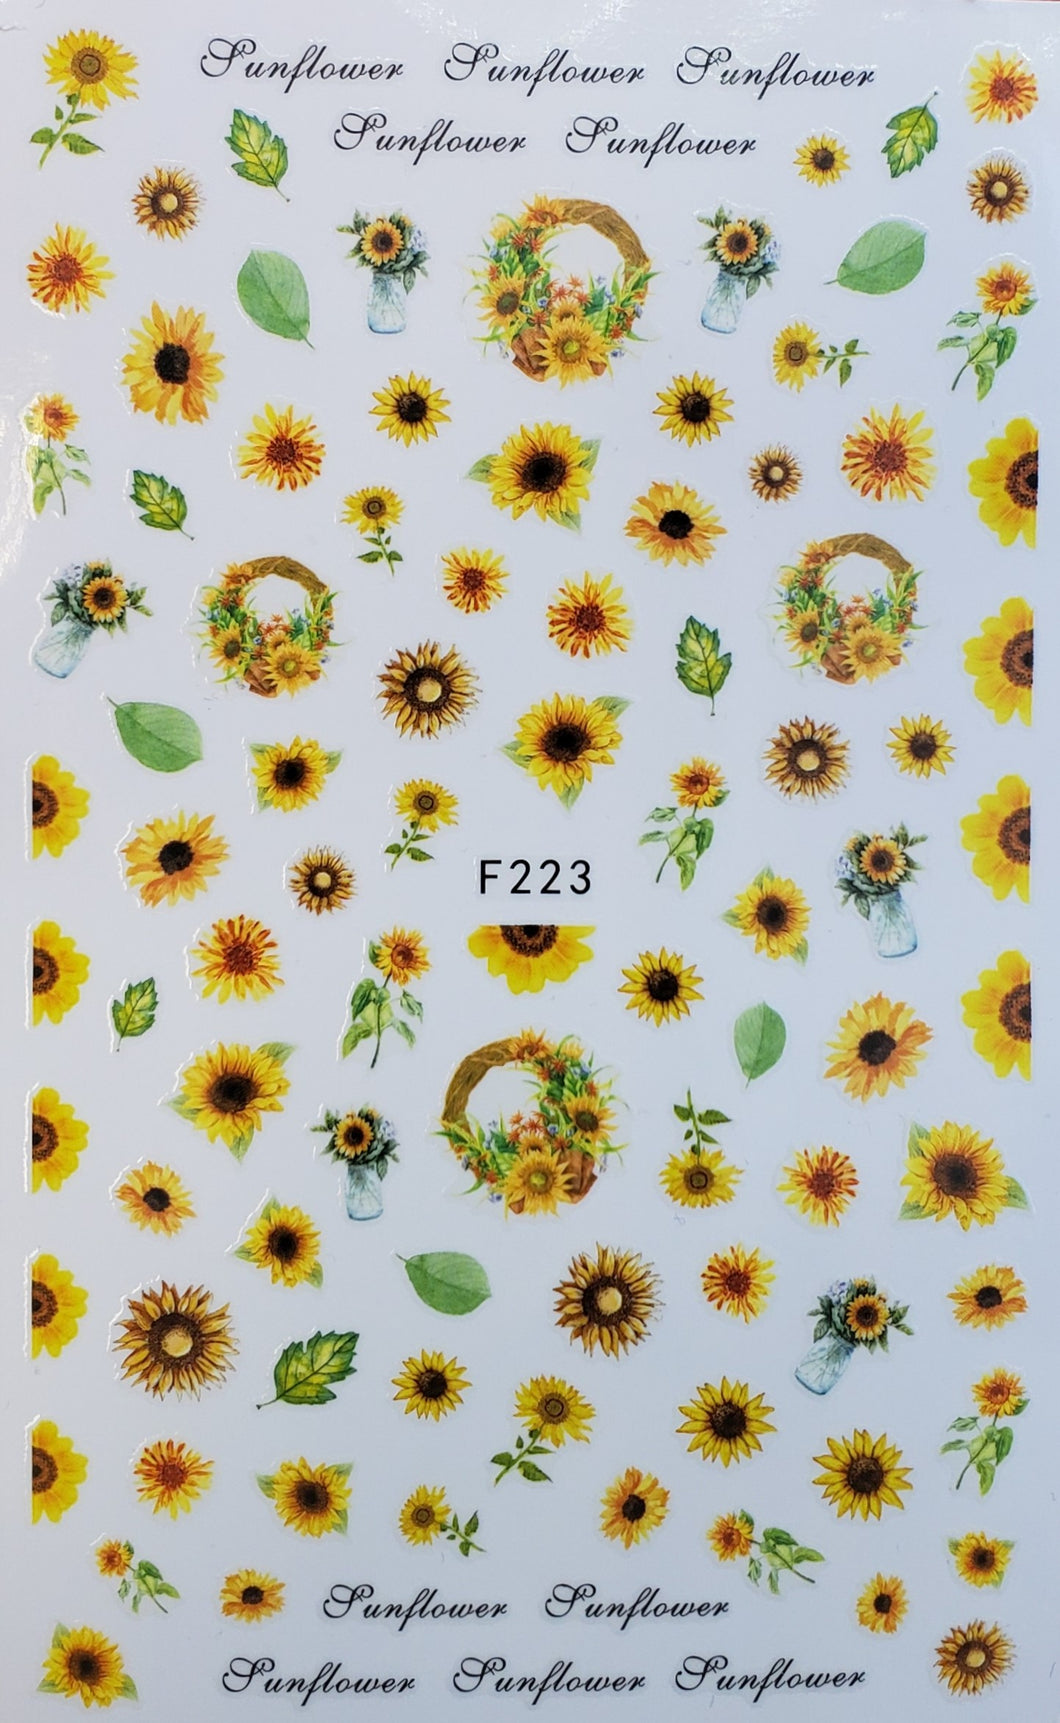 Sunflower water transfer nail decals